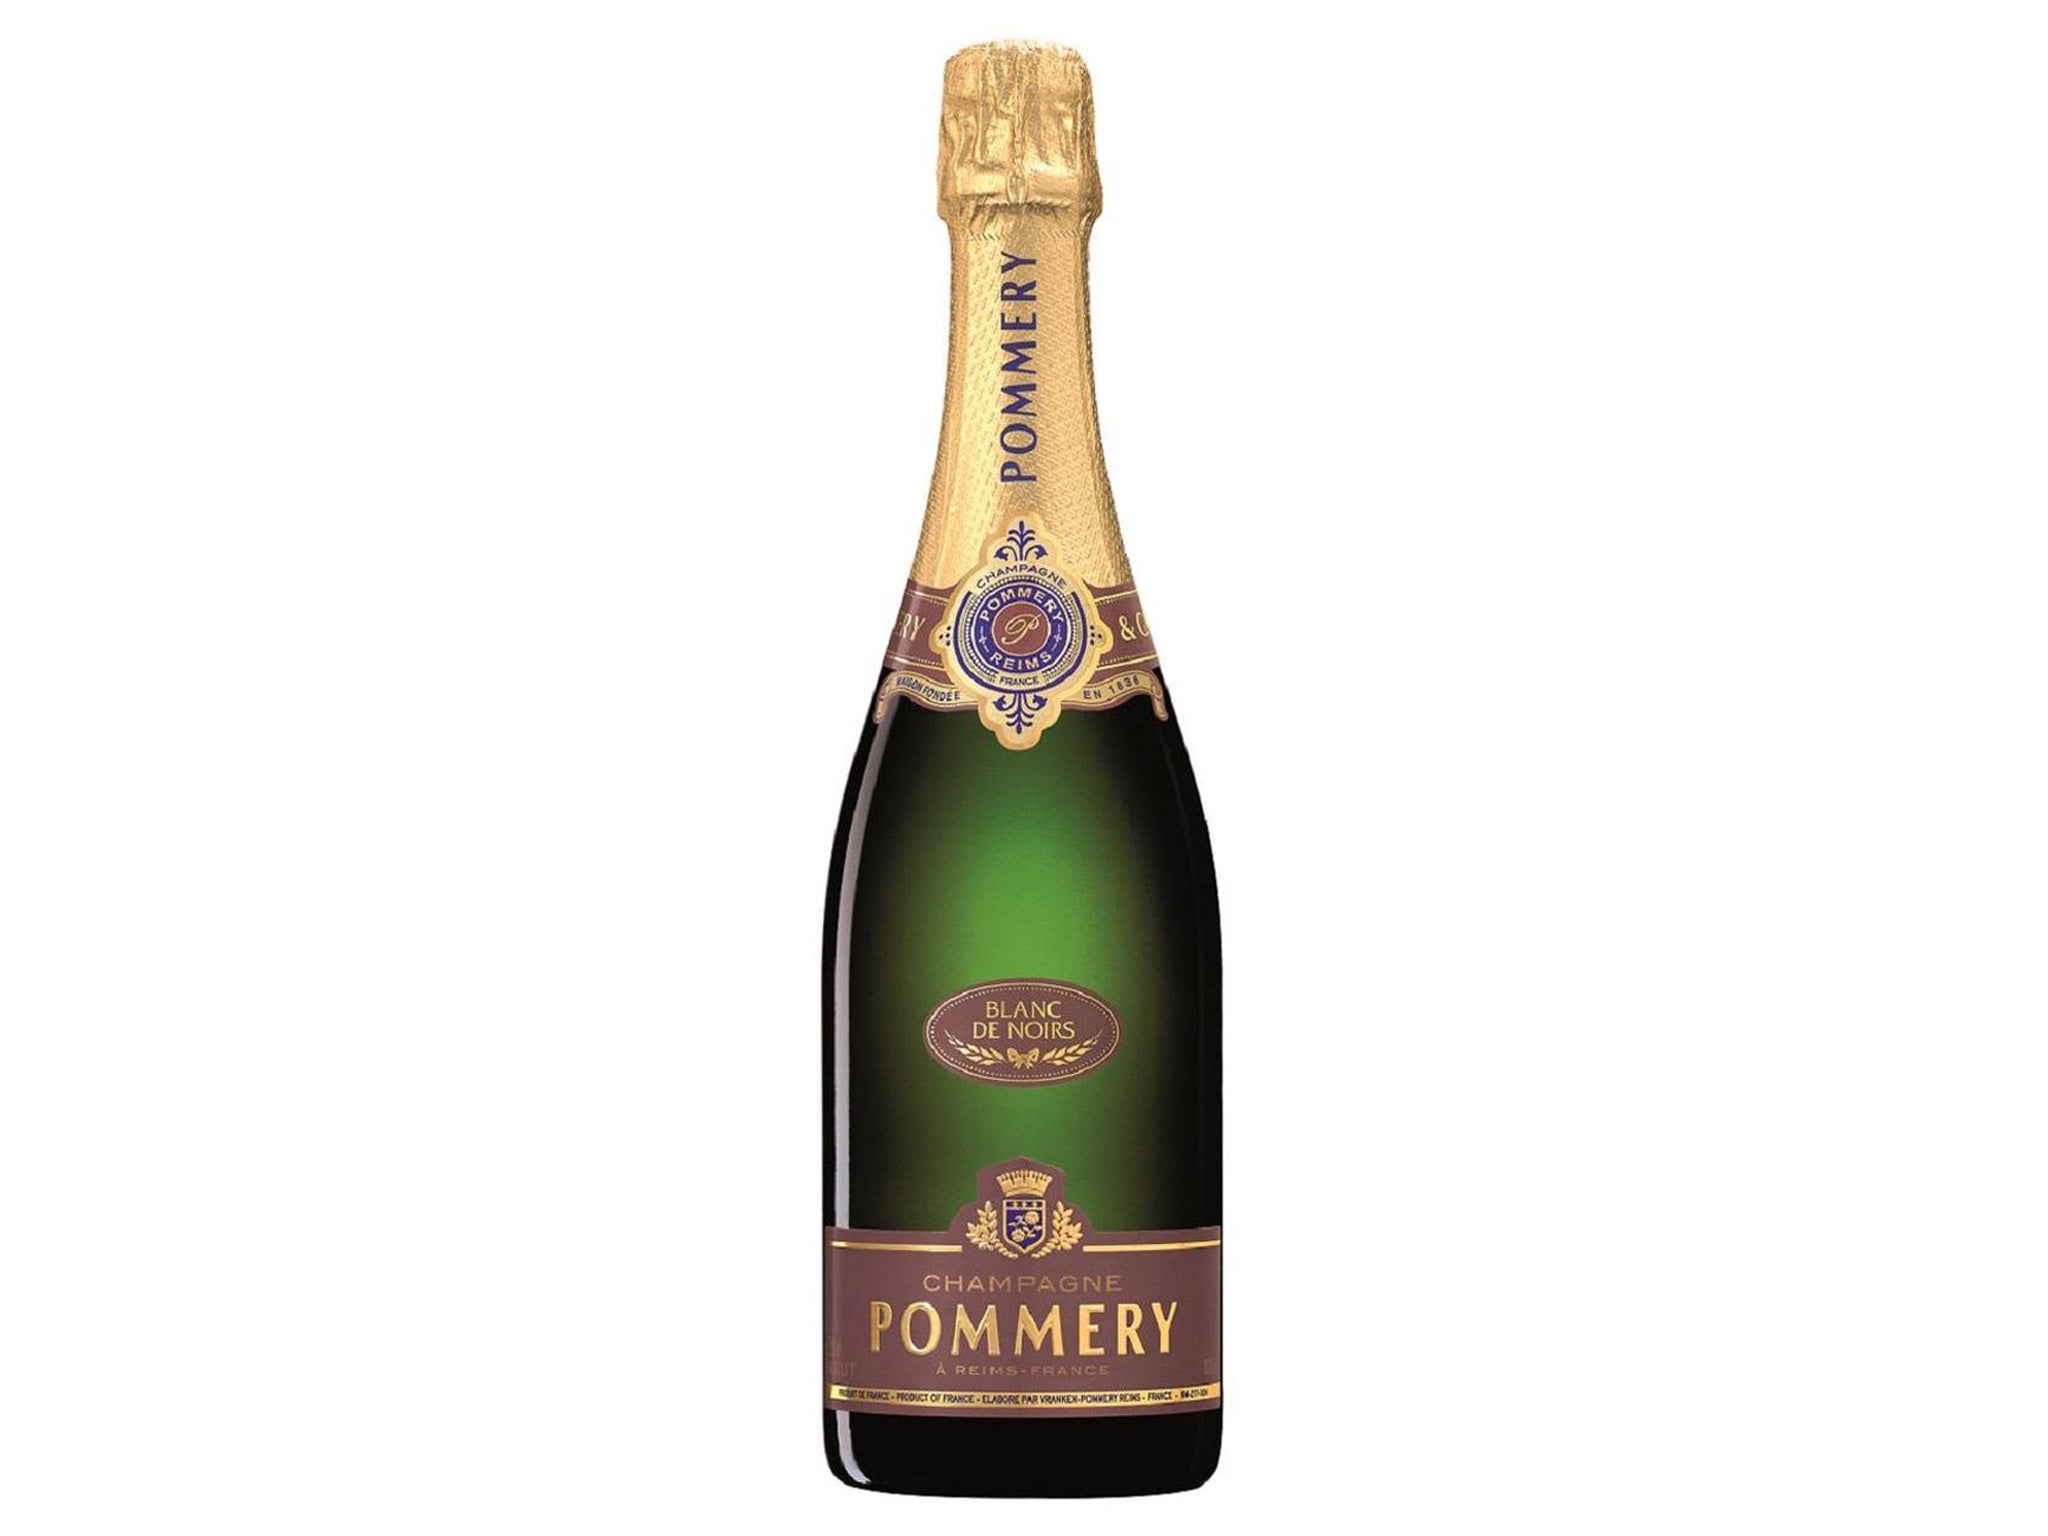 Pommery-indybest-champagne-reivew